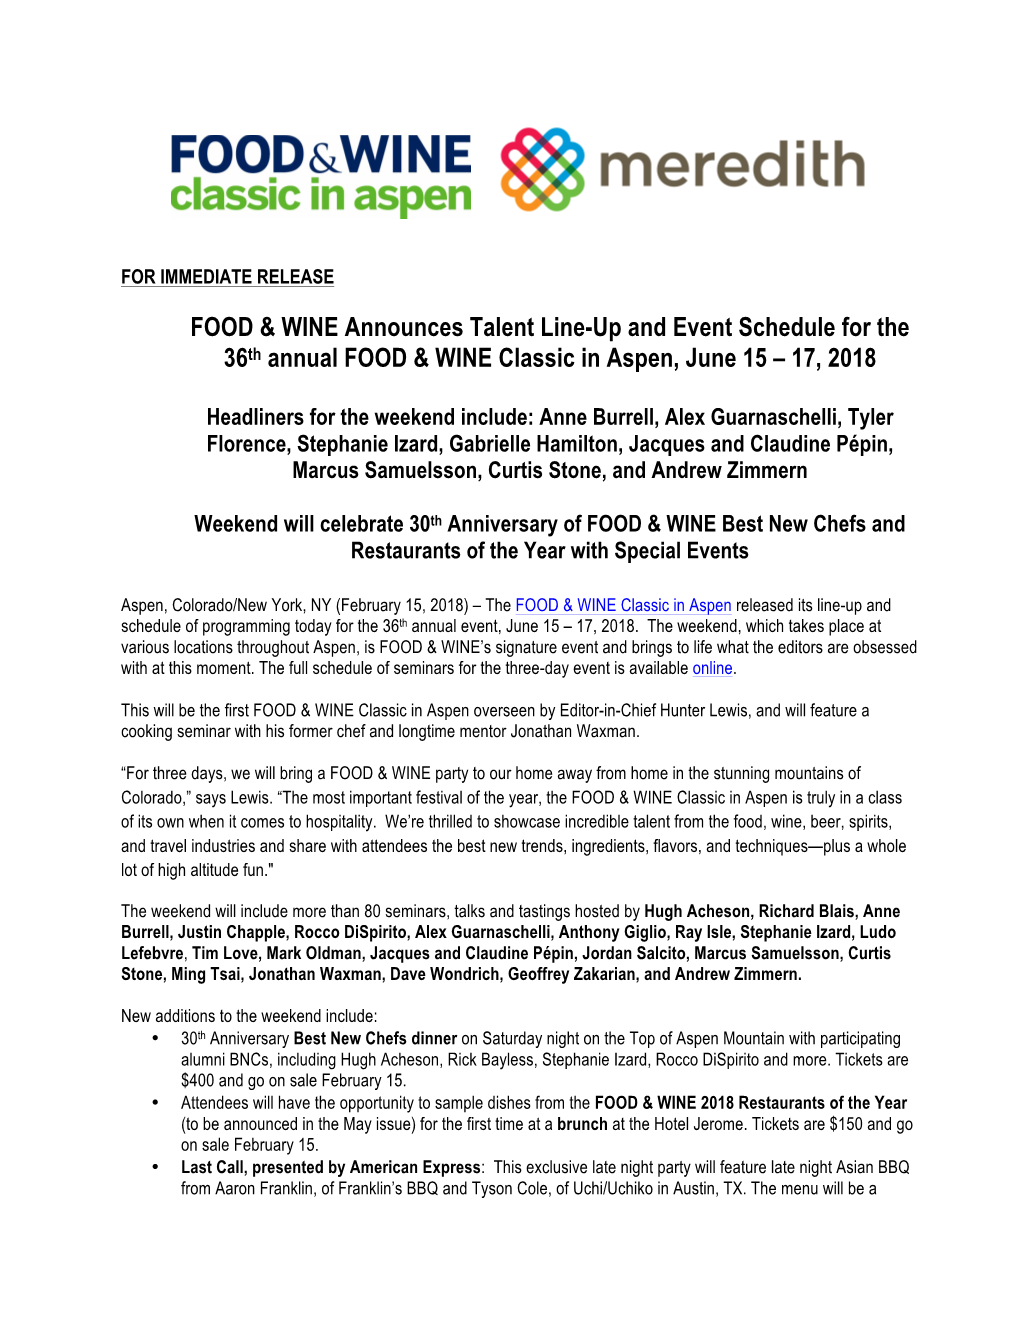 FOOD & WINE Announces Talent Line-Up and Event Schedule for The